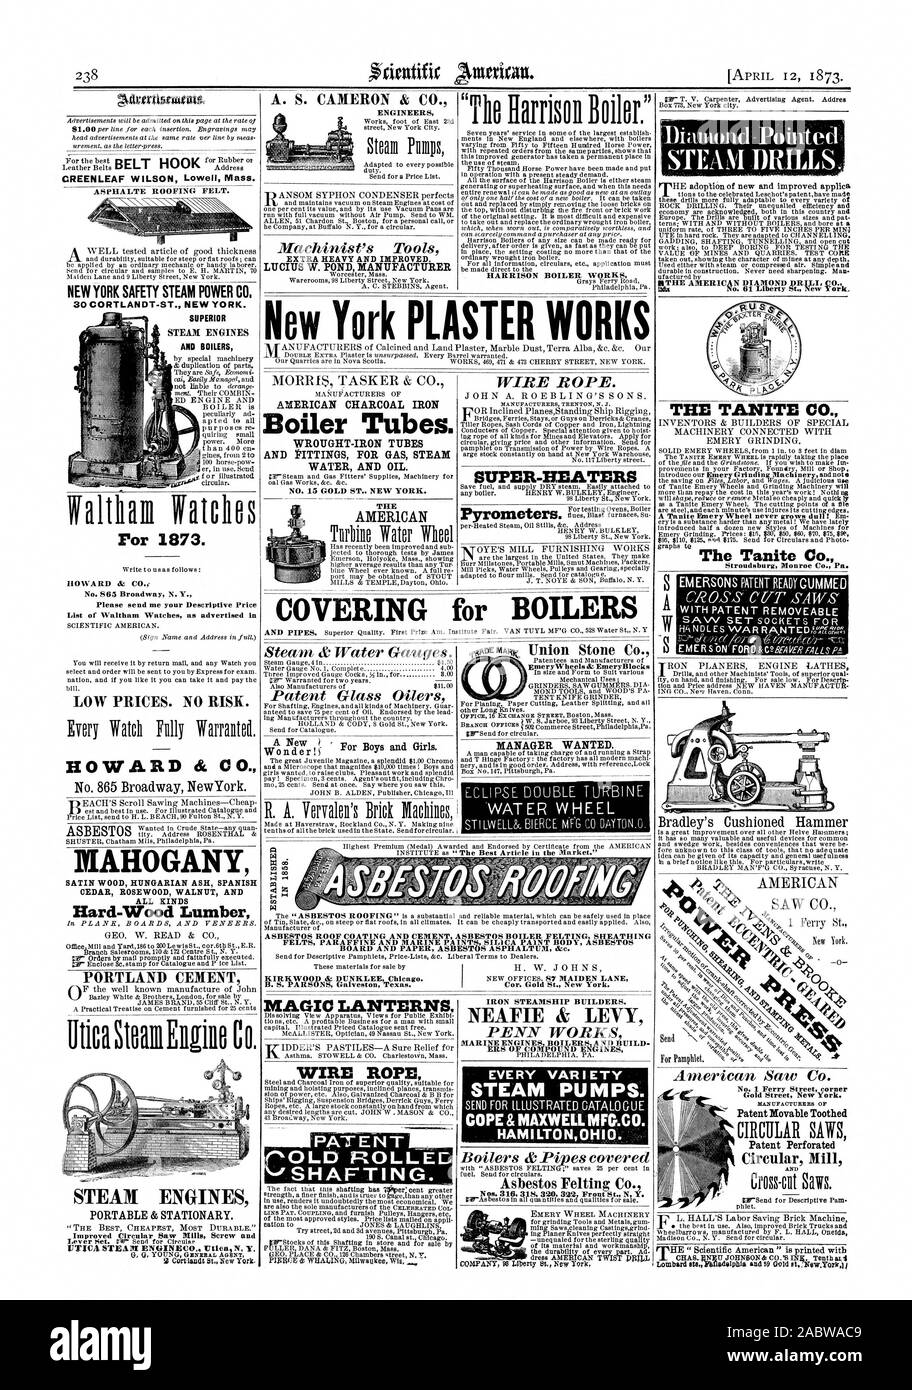 'The Harrison Boiler.' HARRISON BOILER WORKS Please send me your Descriptive Price List of Waltham Watches as advertised in LOW PRICES. NO RISK. HOWARD & CO. No. 865 Broadway NewYork. MAHOGANY SATIN WOOD HUNGARIAN ASH SPANISH CEDAR ROSEWOOD WALNUT AND ALL RINDS Hard-Wood Lumber PORTLAND CEMENT Utica %Engine Co. STEAM ENGINES PORTABLE & STATIONARY. A. S. CAMERON & CO. ENGINEERS Machinist's Tools EXTRA HEAVY AND IMPROVED. LUCIUS W. POND MANUFACTURER AMERICAN CHARCOAL IRON Boiler Tubes. WROUGHT-IRON TUBES AND PITTINGS FOR GAS STEAM WATER AND OIL. NO. 15 GOLD ST. NEW YORK. THE AMERICAN MAGIC LANTE Stock Photo